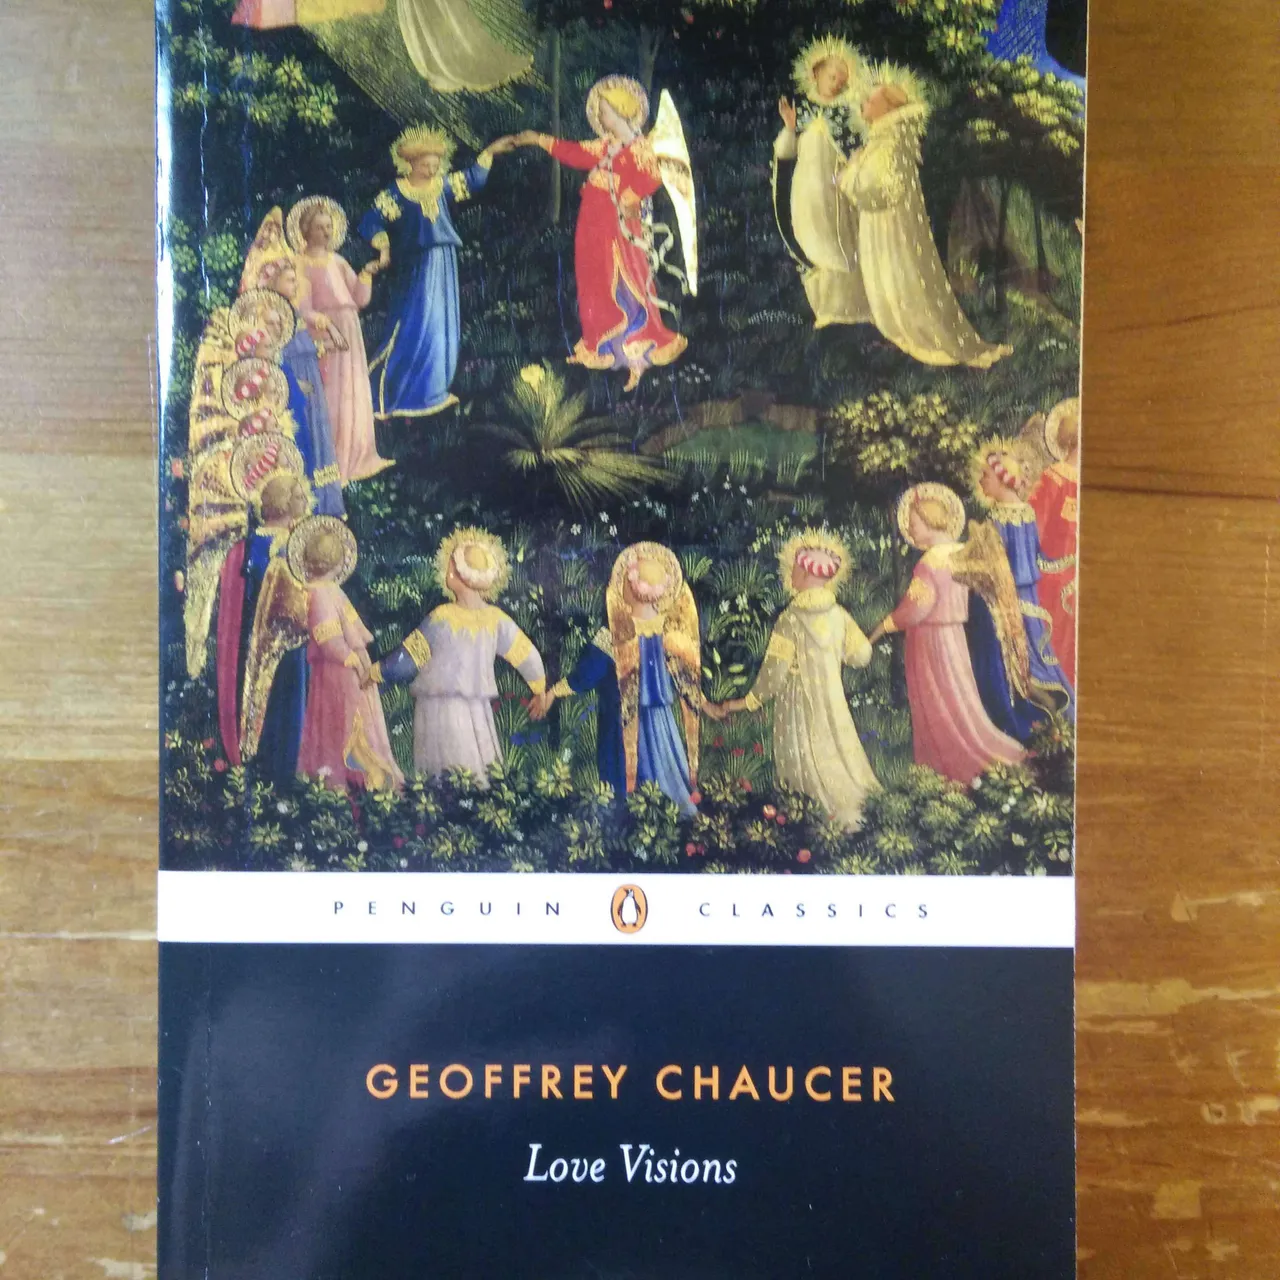 Love Visions by Geoffrey Chaucer photo 1